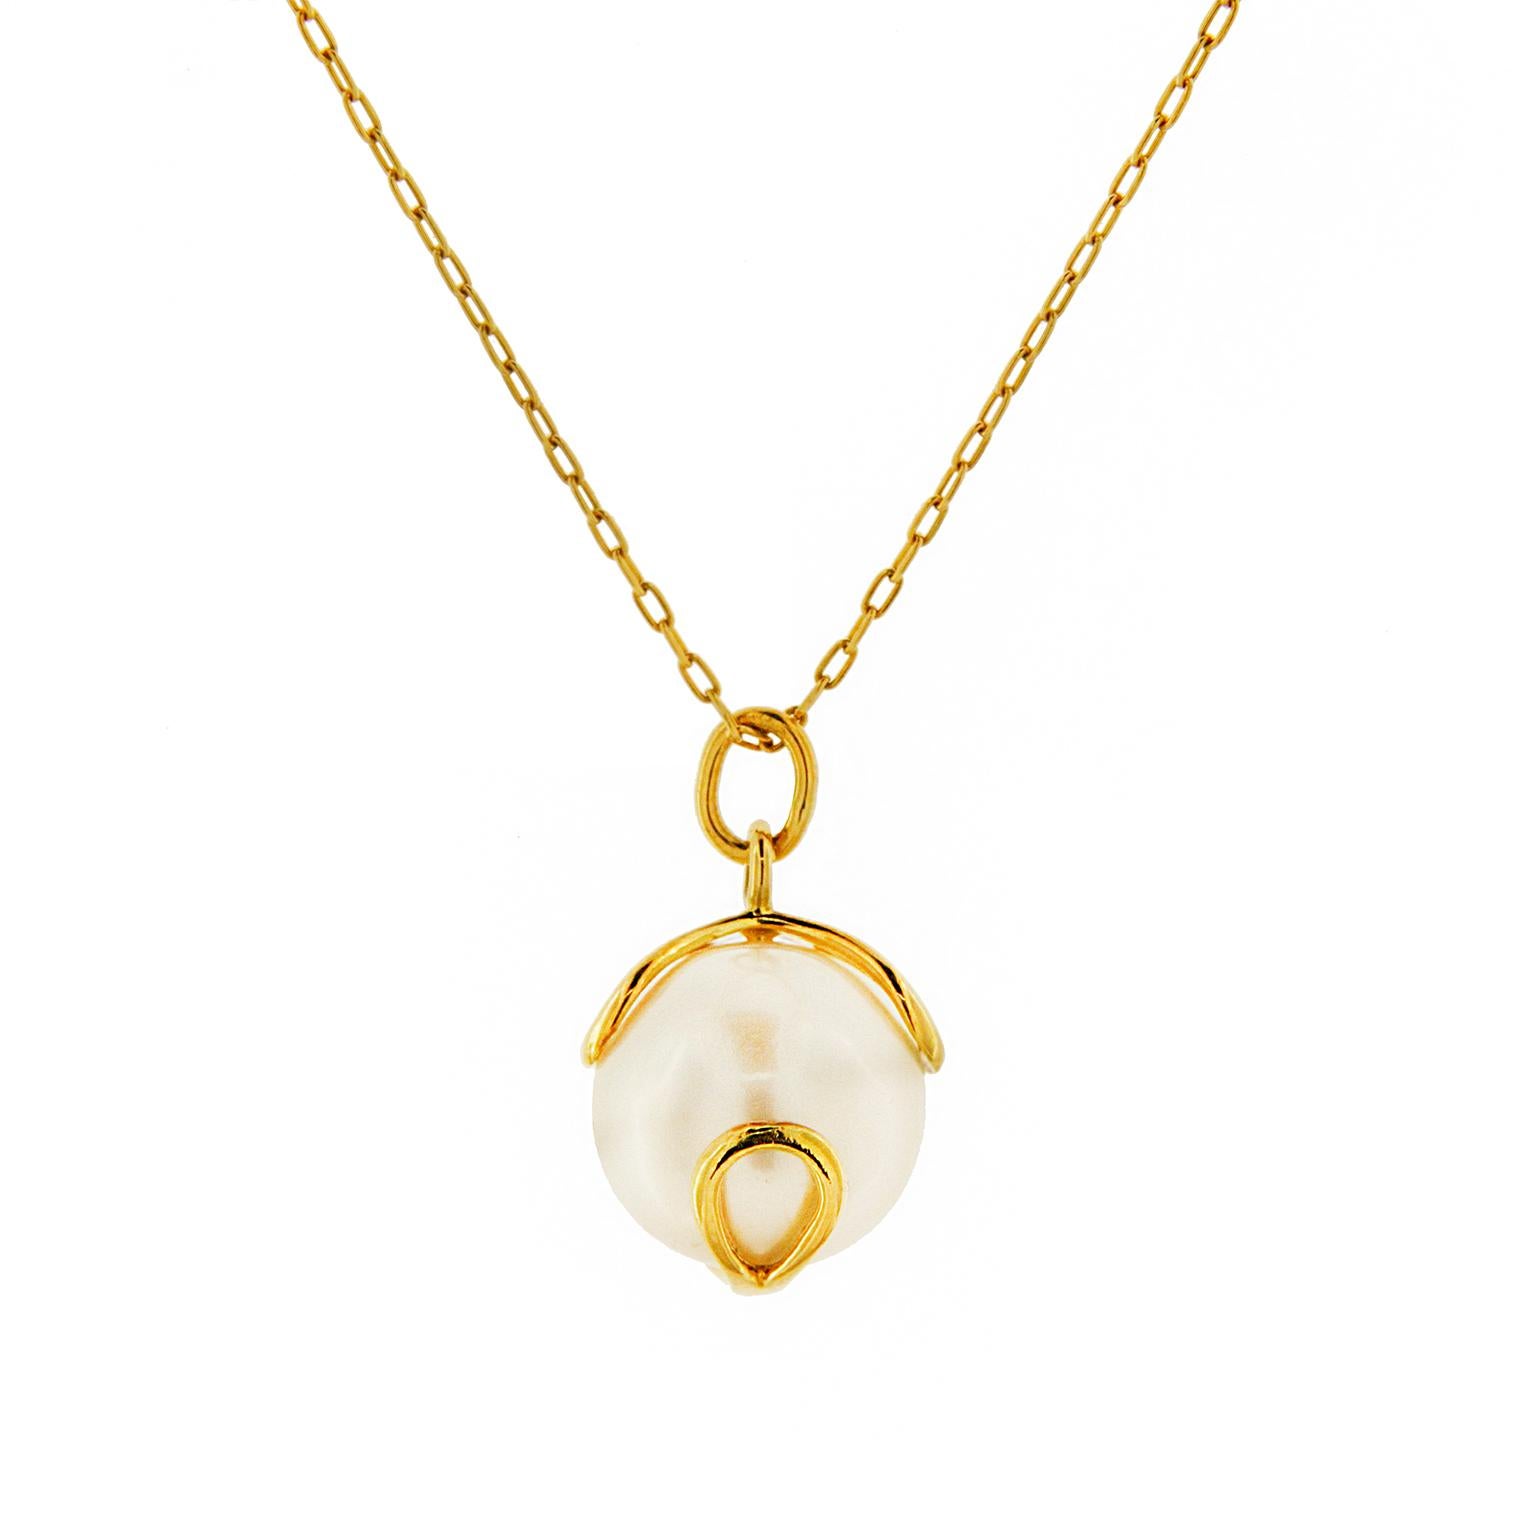 Carina Pendant features a 12mm Fresh Water Pearl with 18 inch chain in 18kt. yellow gold 